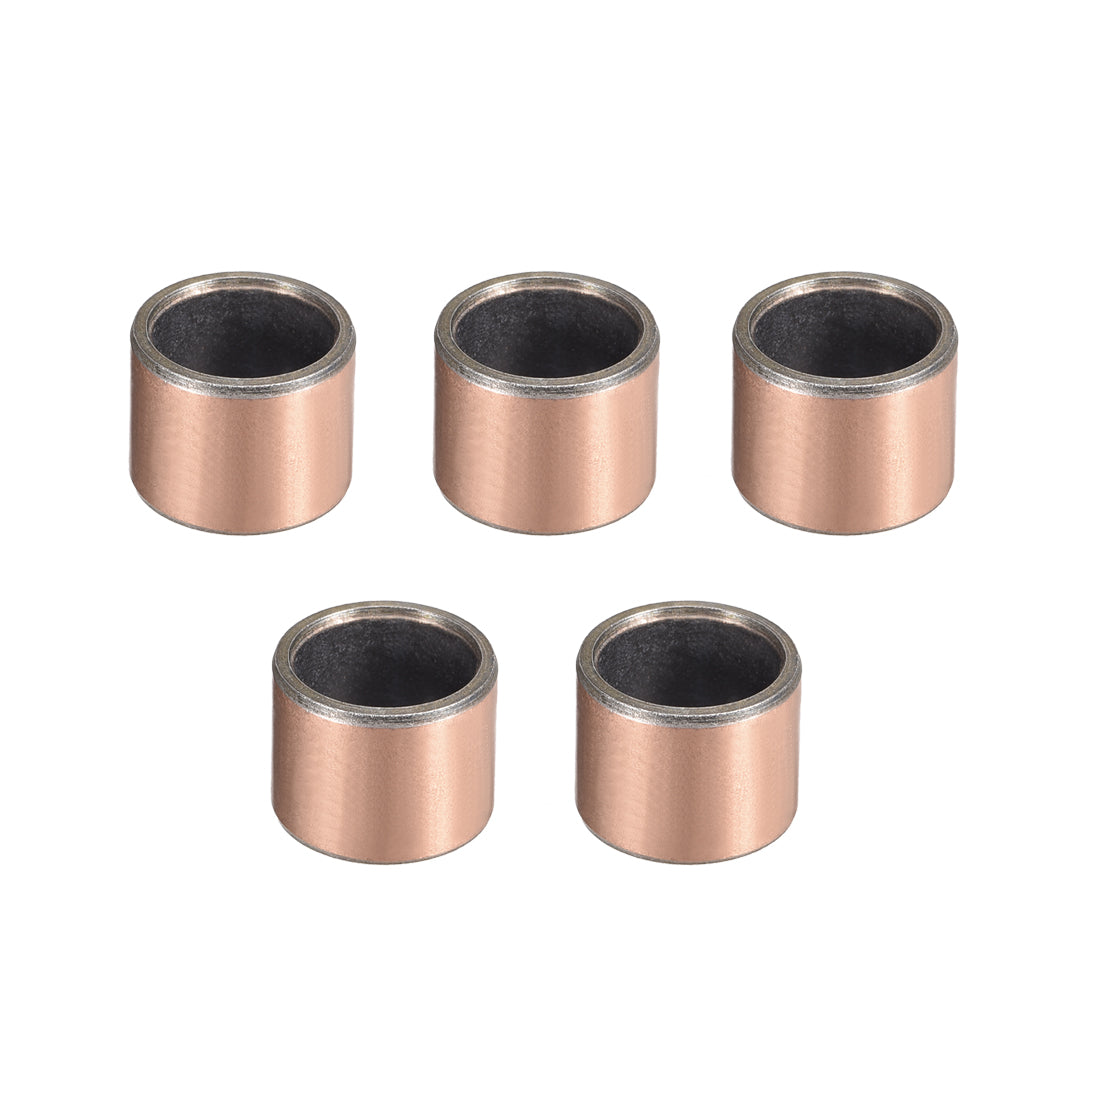 uxcell Uxcell Sleeve (Plain) Bearings 12mm Bore 15mm OD 12mm L Wrapped Oilless Bushings 5pcs